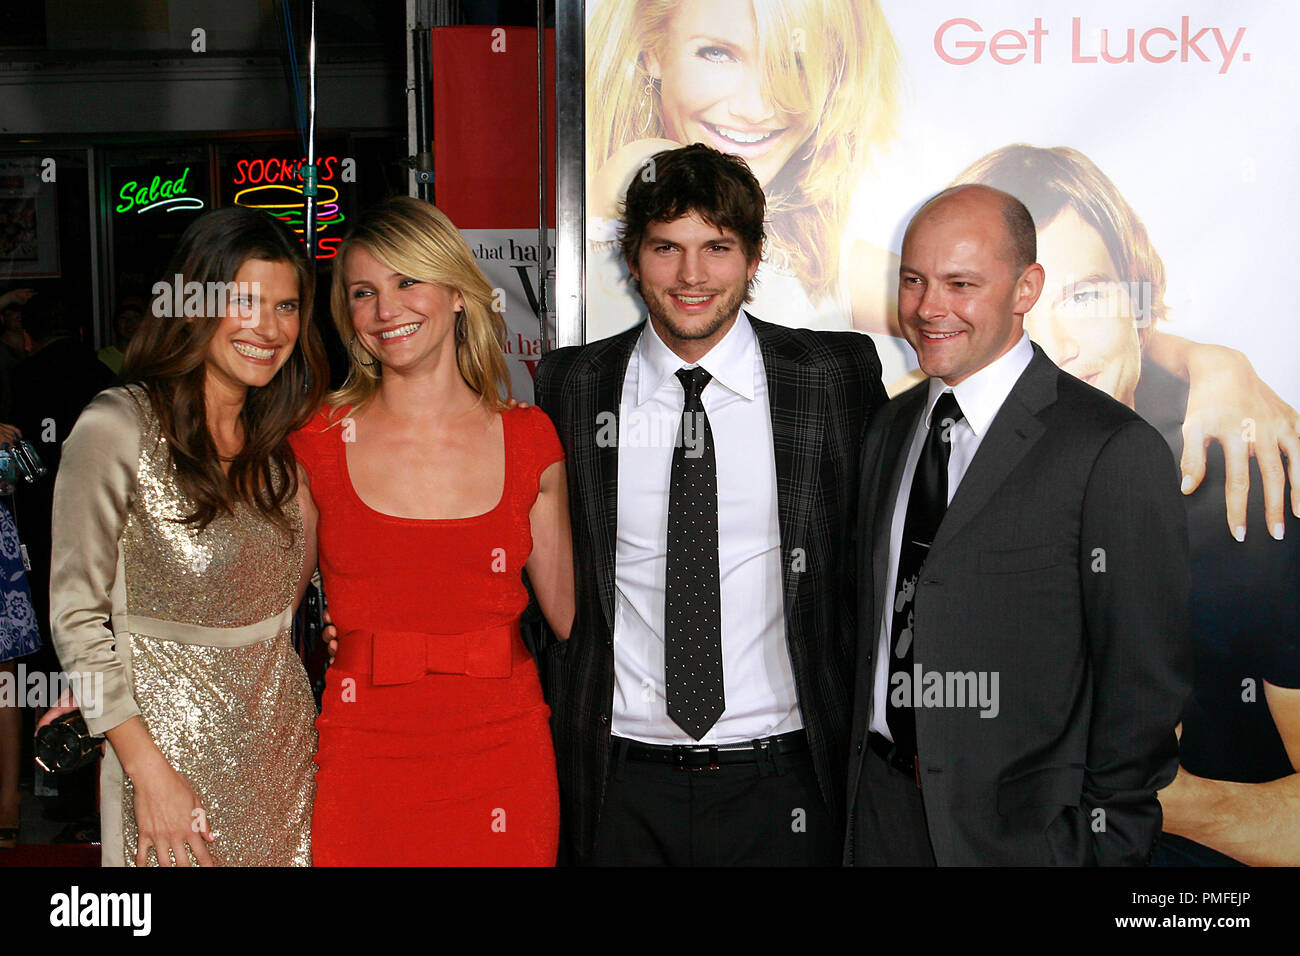 'What Happens In Vegas...' Premiere Lake Bell, Cameron Diaz, Ashton Kutcher, Rob Corddry 5-1-2008 / Mann Village Theater / Hollywood, CA / Twentieth Century Fox / Photo © Joseph Martinez / Picturelux  File Reference # 23507 0078JM   For Editorial Use Only -  All Rights Reserved Stock Photo